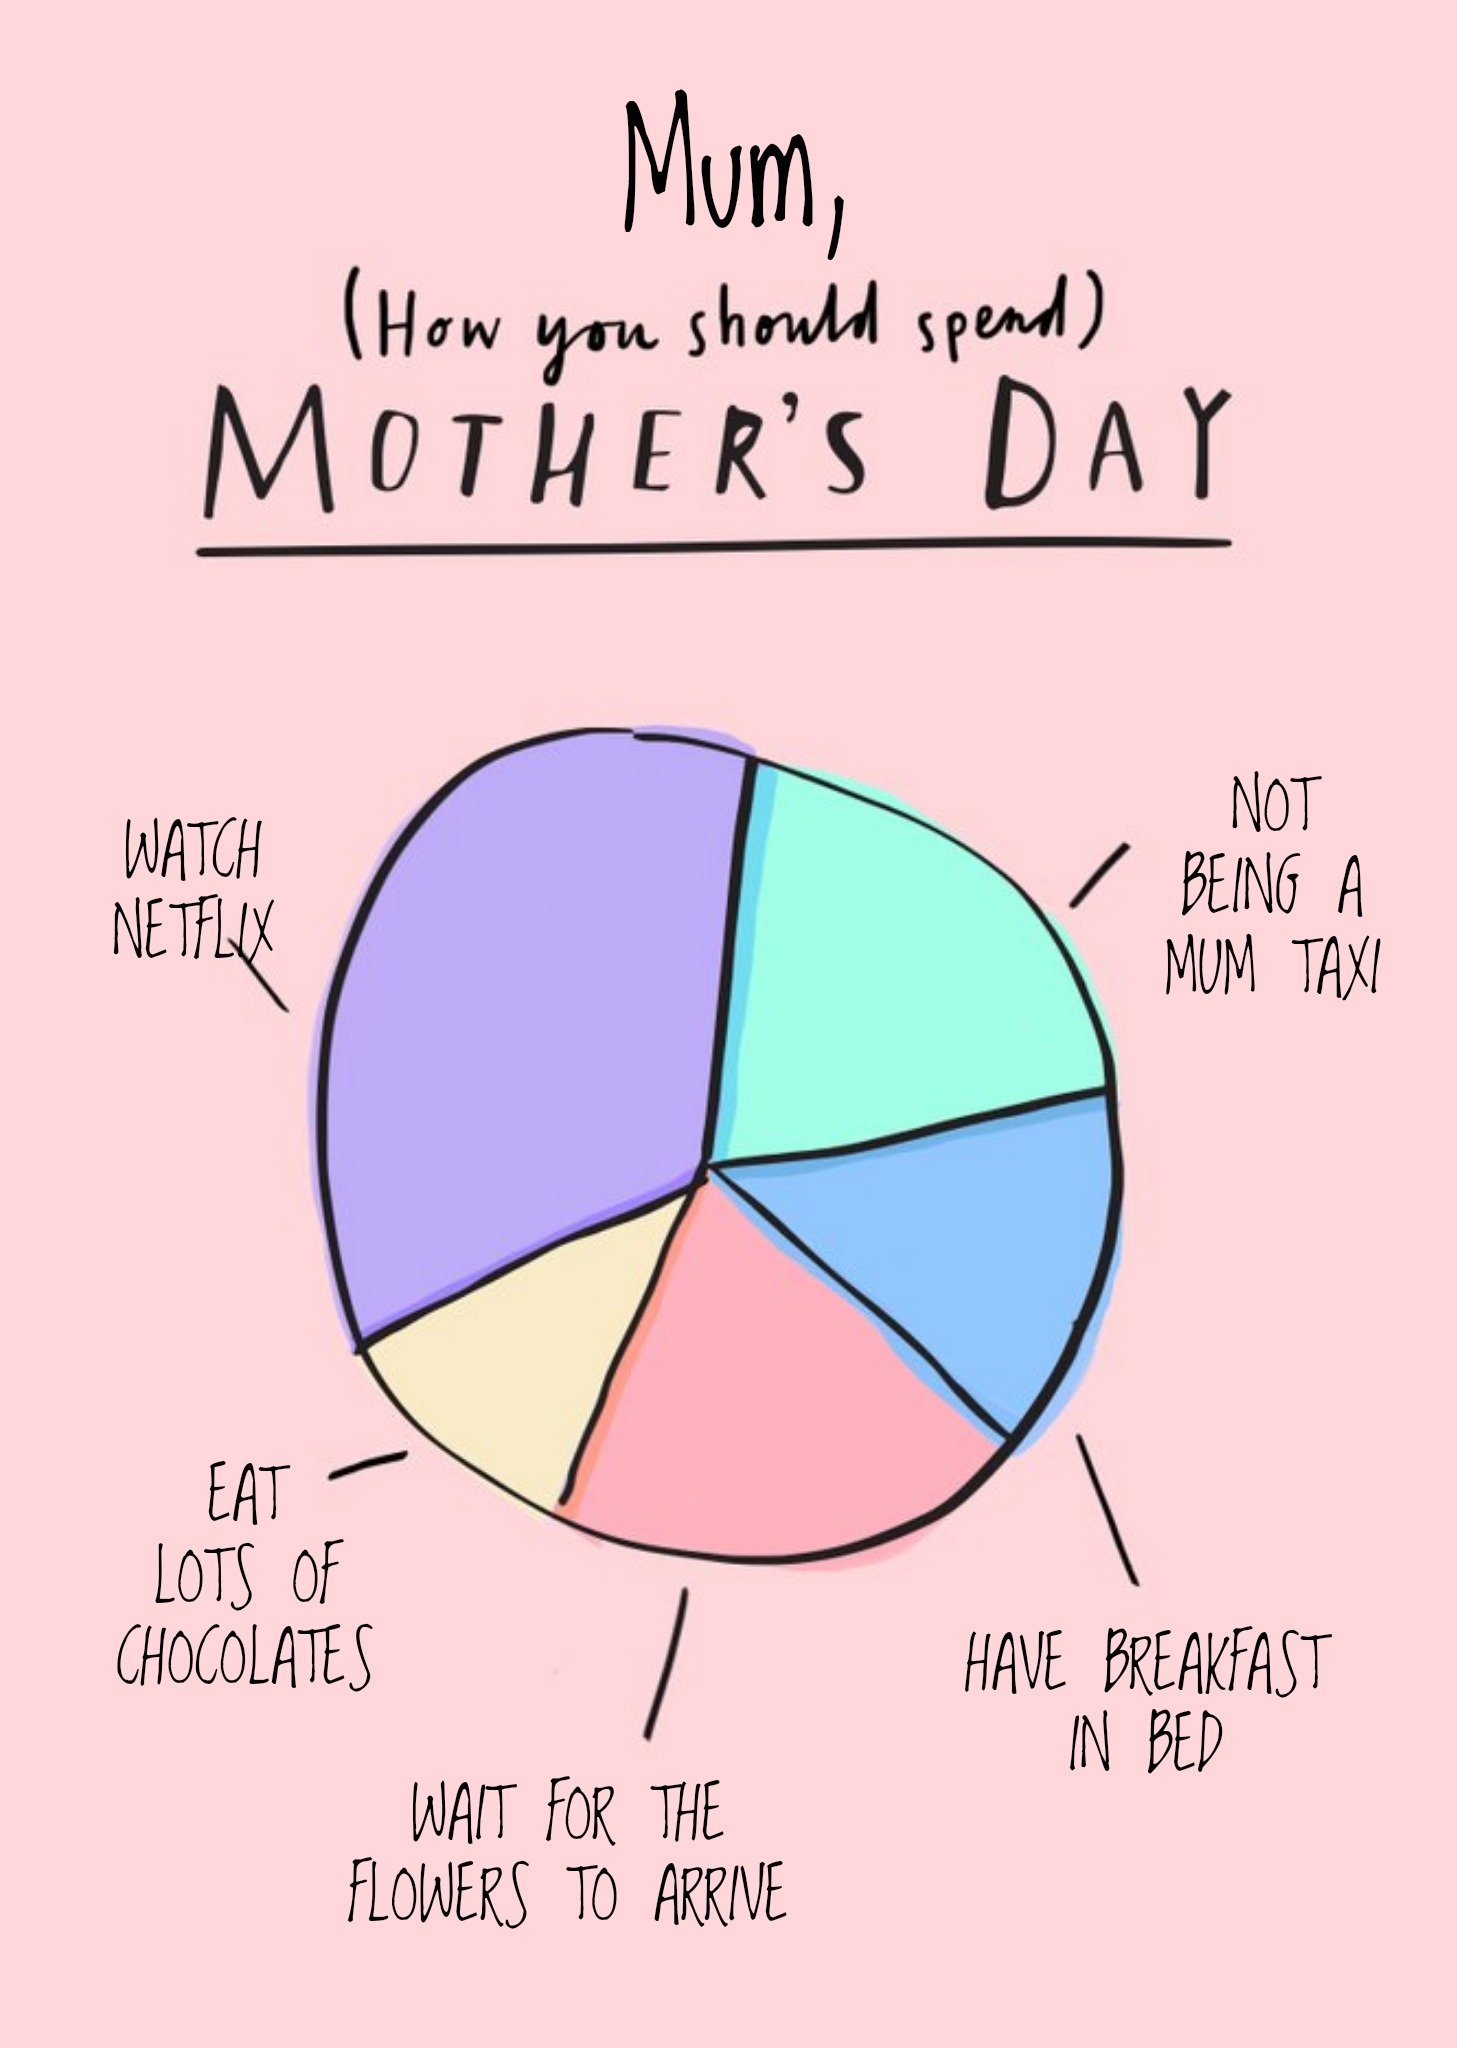 Moonpig Mother's Day Card - Funny Pie Chart - How You Should Spend Mother's Day, Large